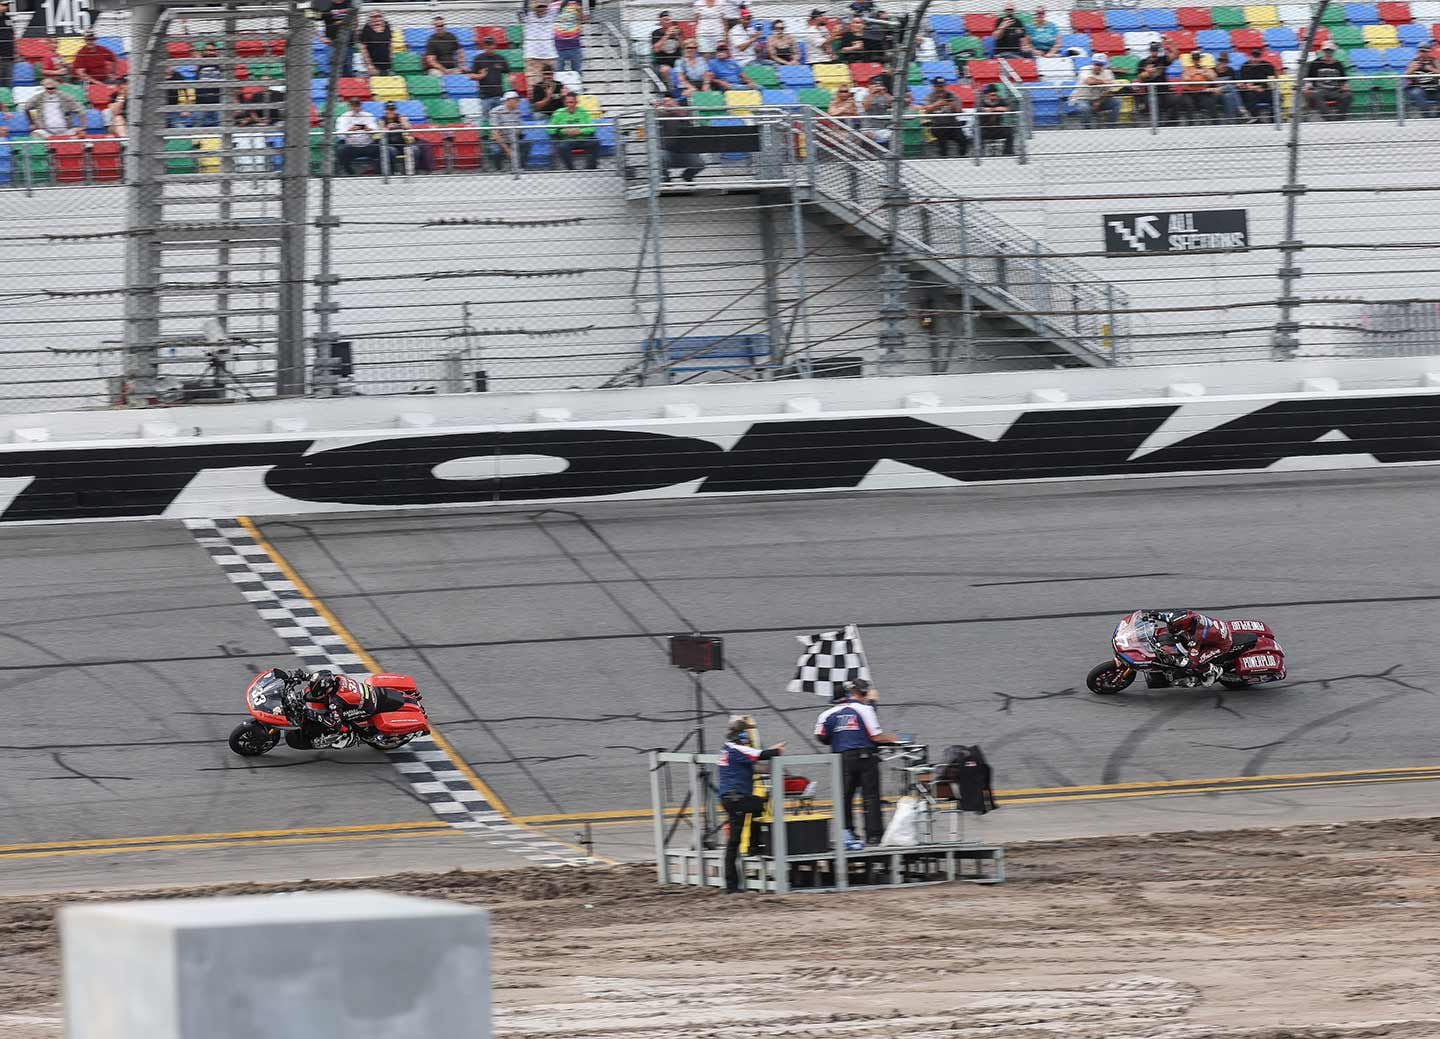 A top speed of 182 mph was achieved by MotoAmerica’s King of the Baggers at Daytona.